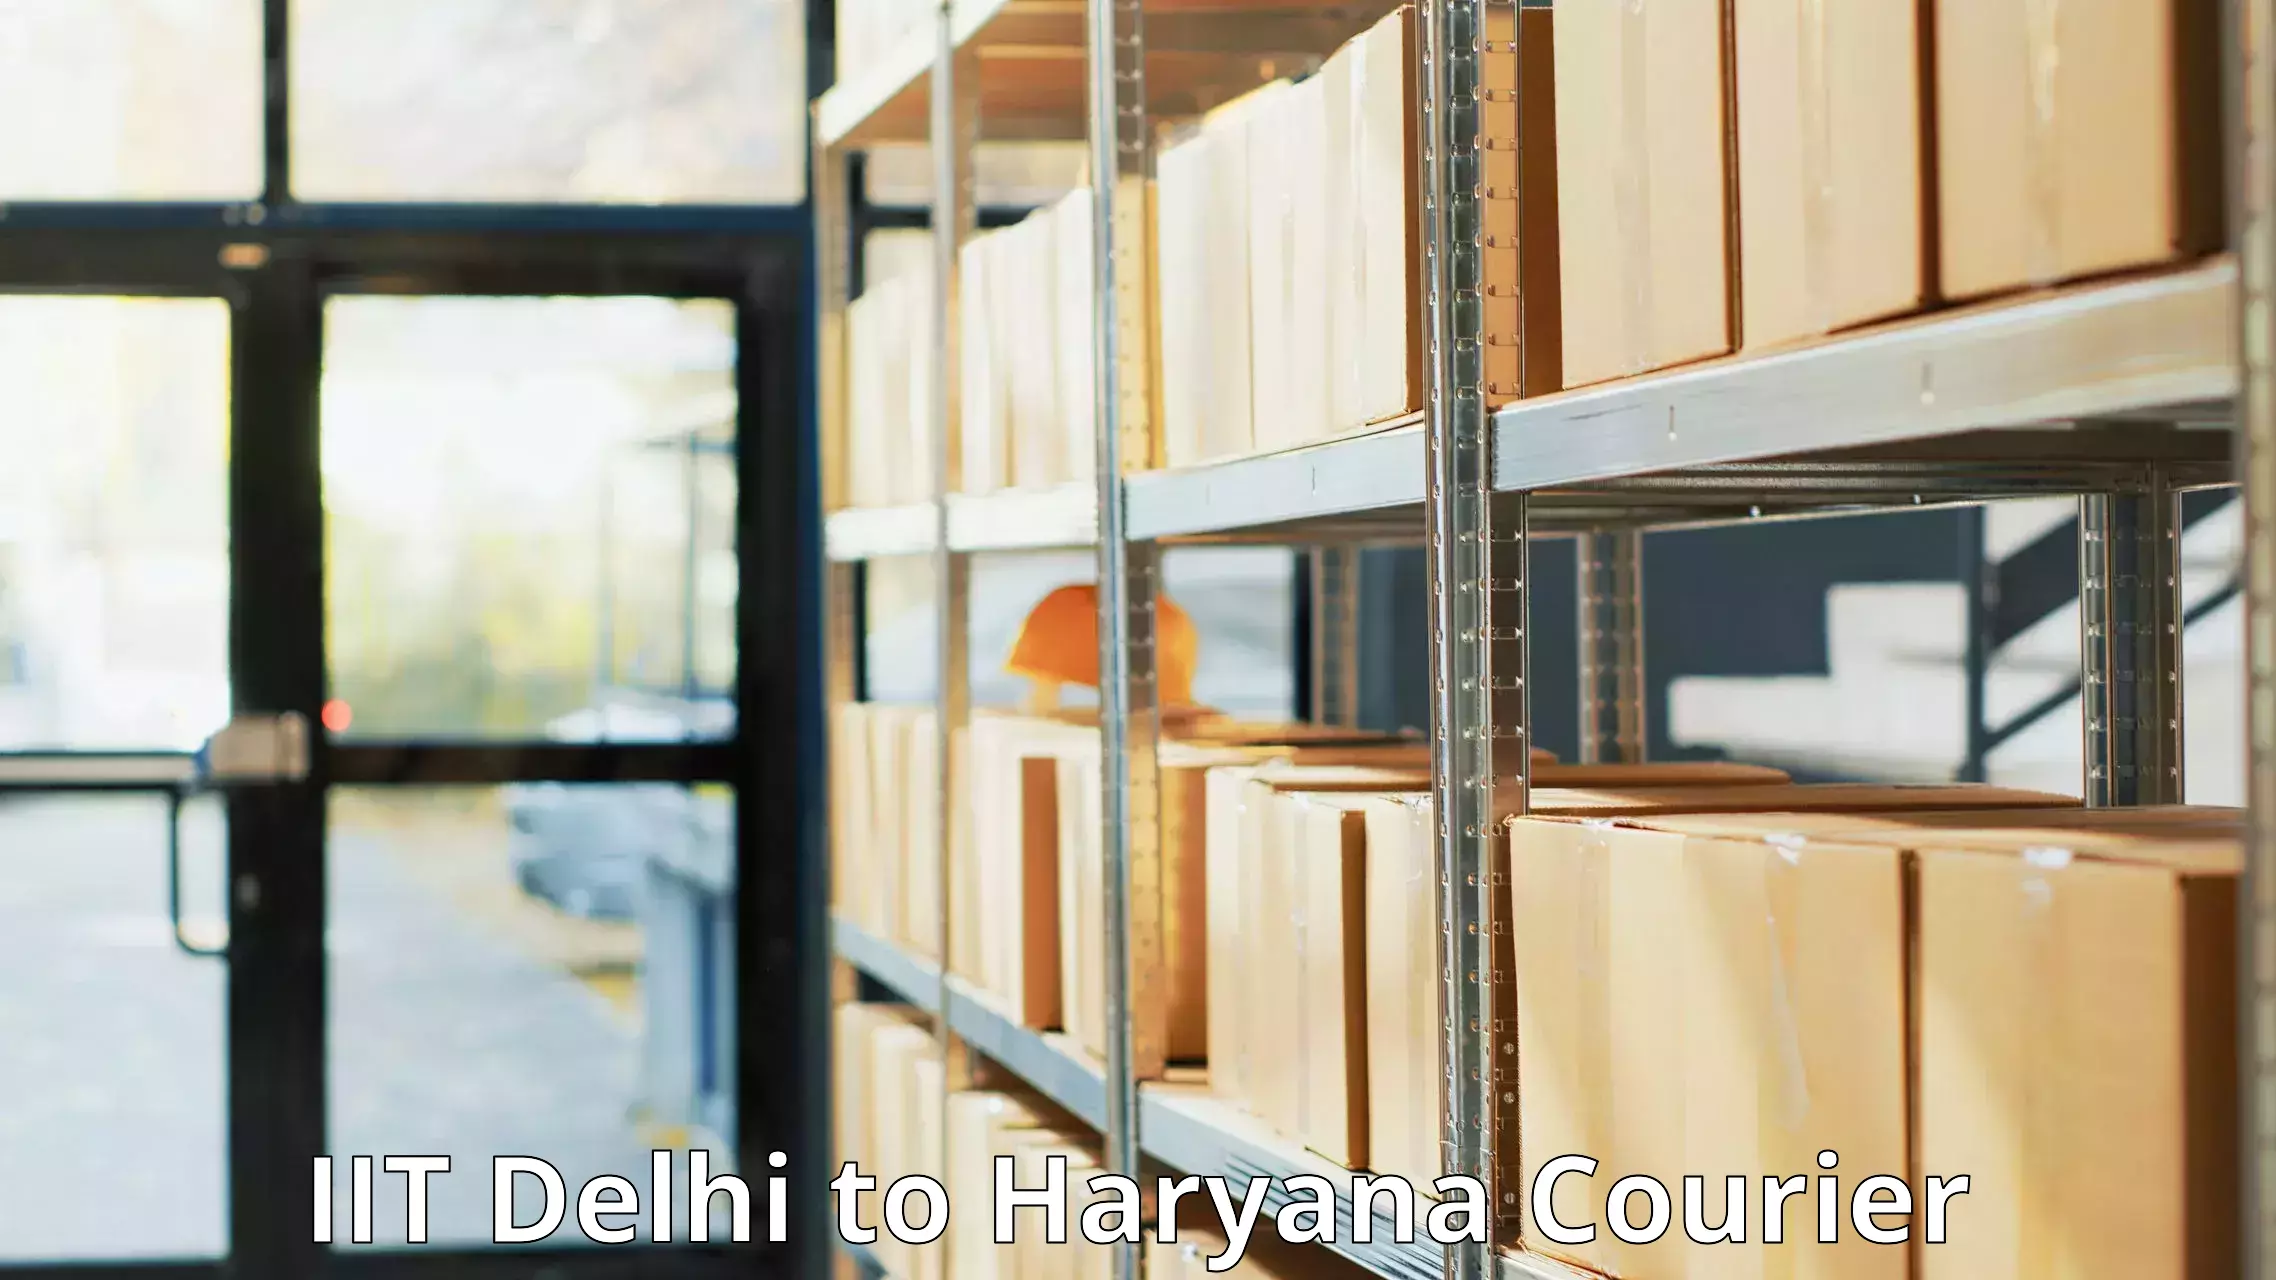 Courier service partnerships in IIT Delhi to Jind